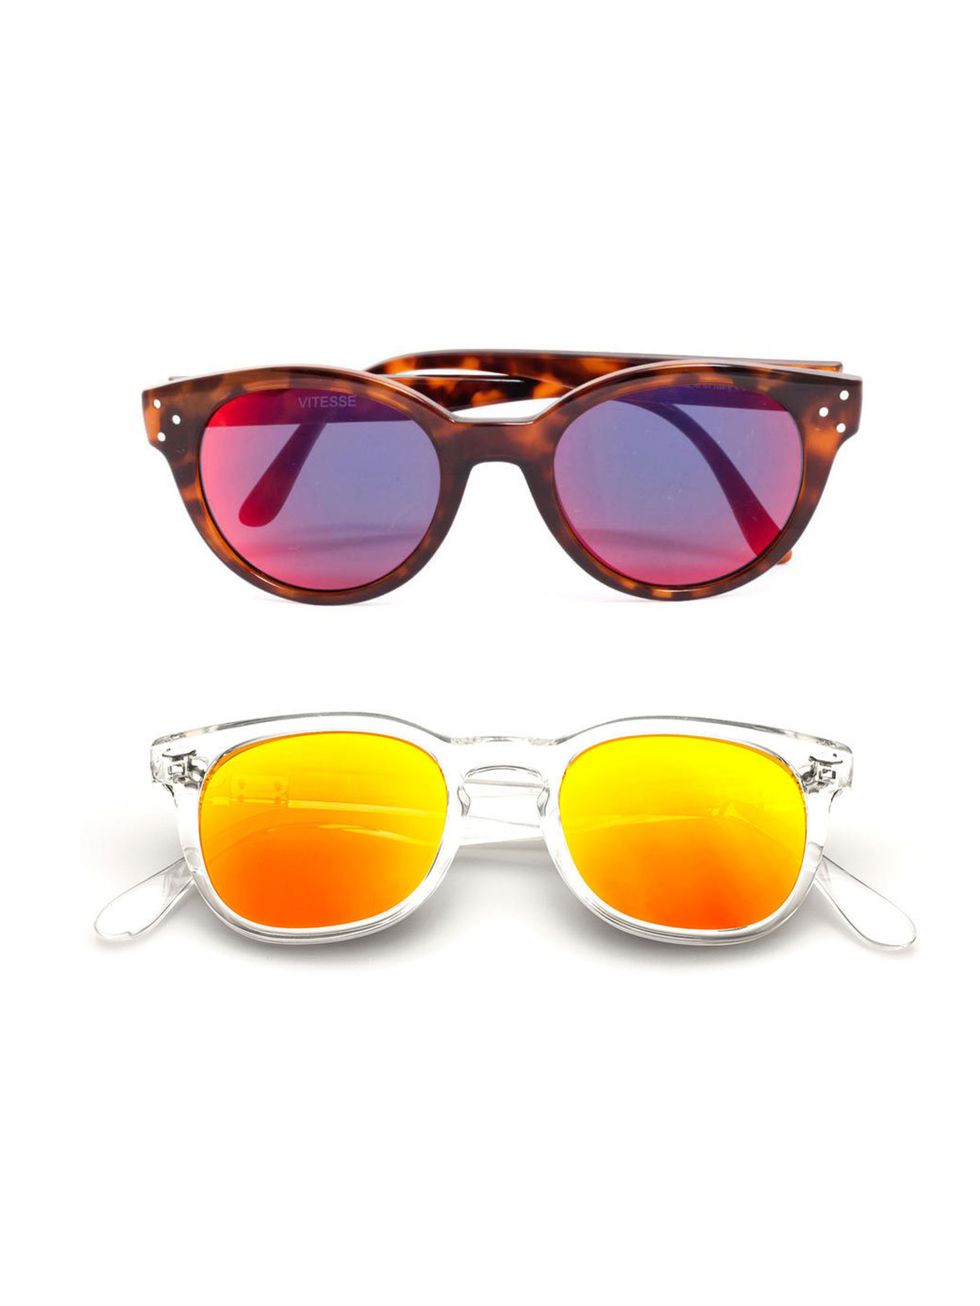 <p><a href="http://www.matchesfashion.com/womens/spektre">Spektre</a></p><p>This Milan based brand combine style with cutting-edge technology. Dont limit the hi-tech polarized lens to the summer months; theyre perfect for sunny sandy beaches and illumin